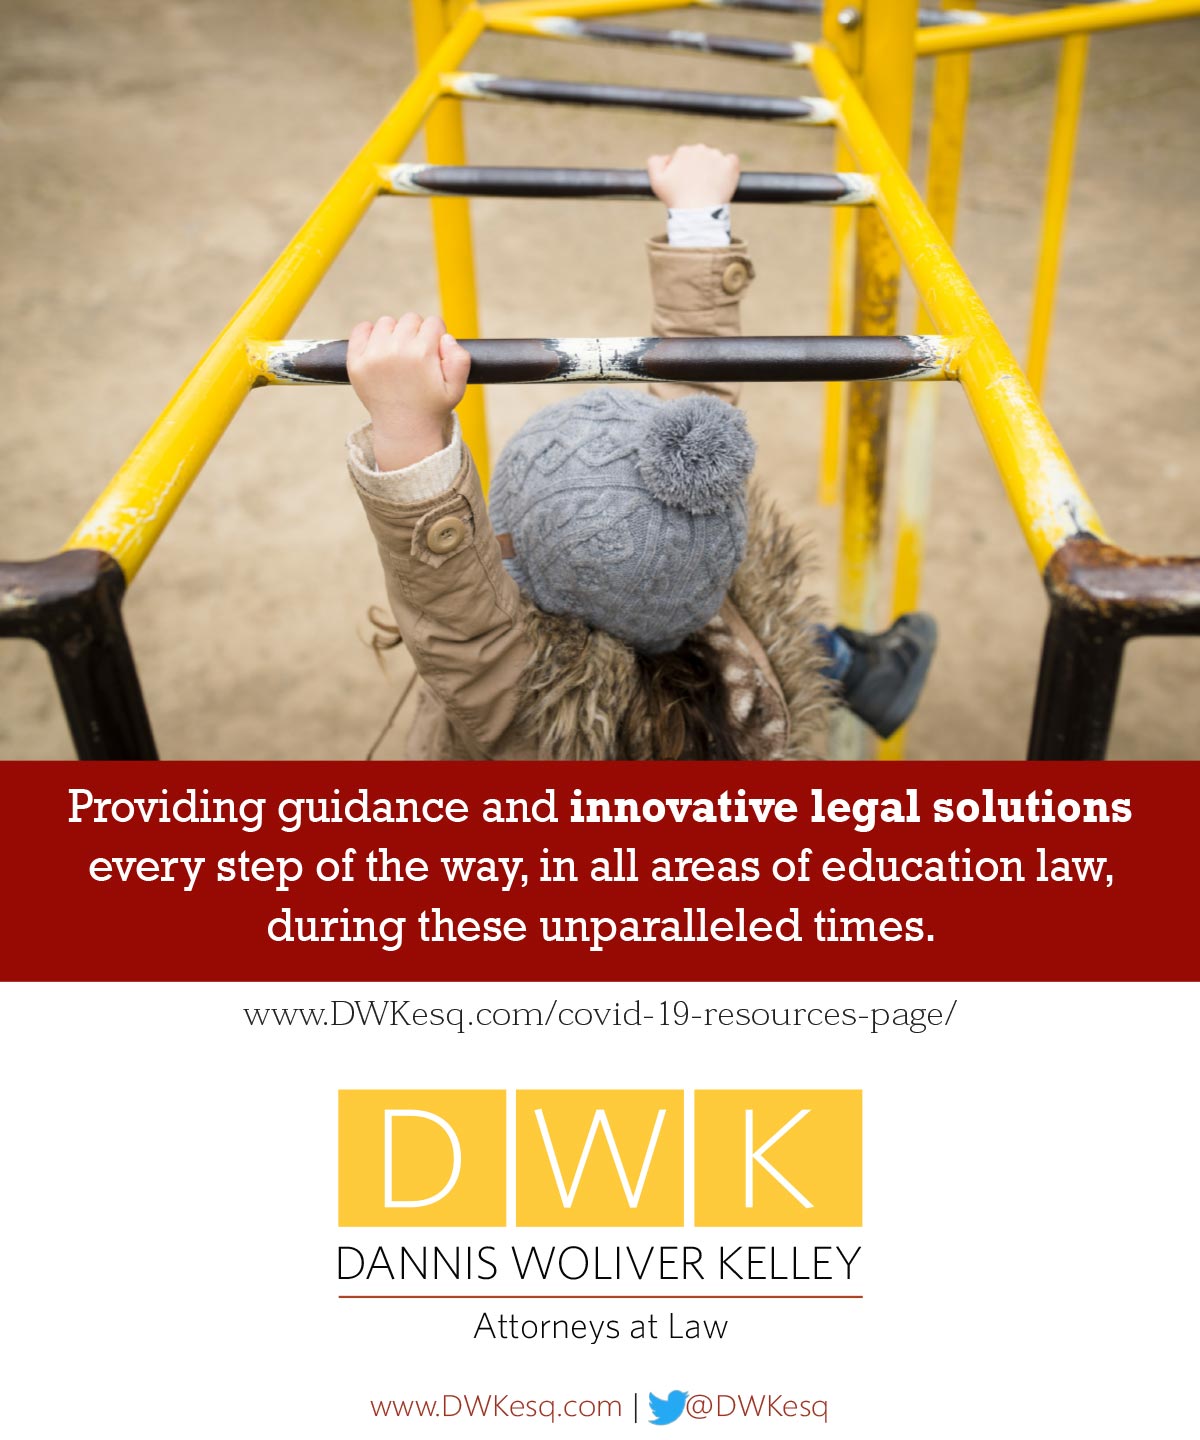 Dannis Woliver Kelley Attorney's at Law Advertisement